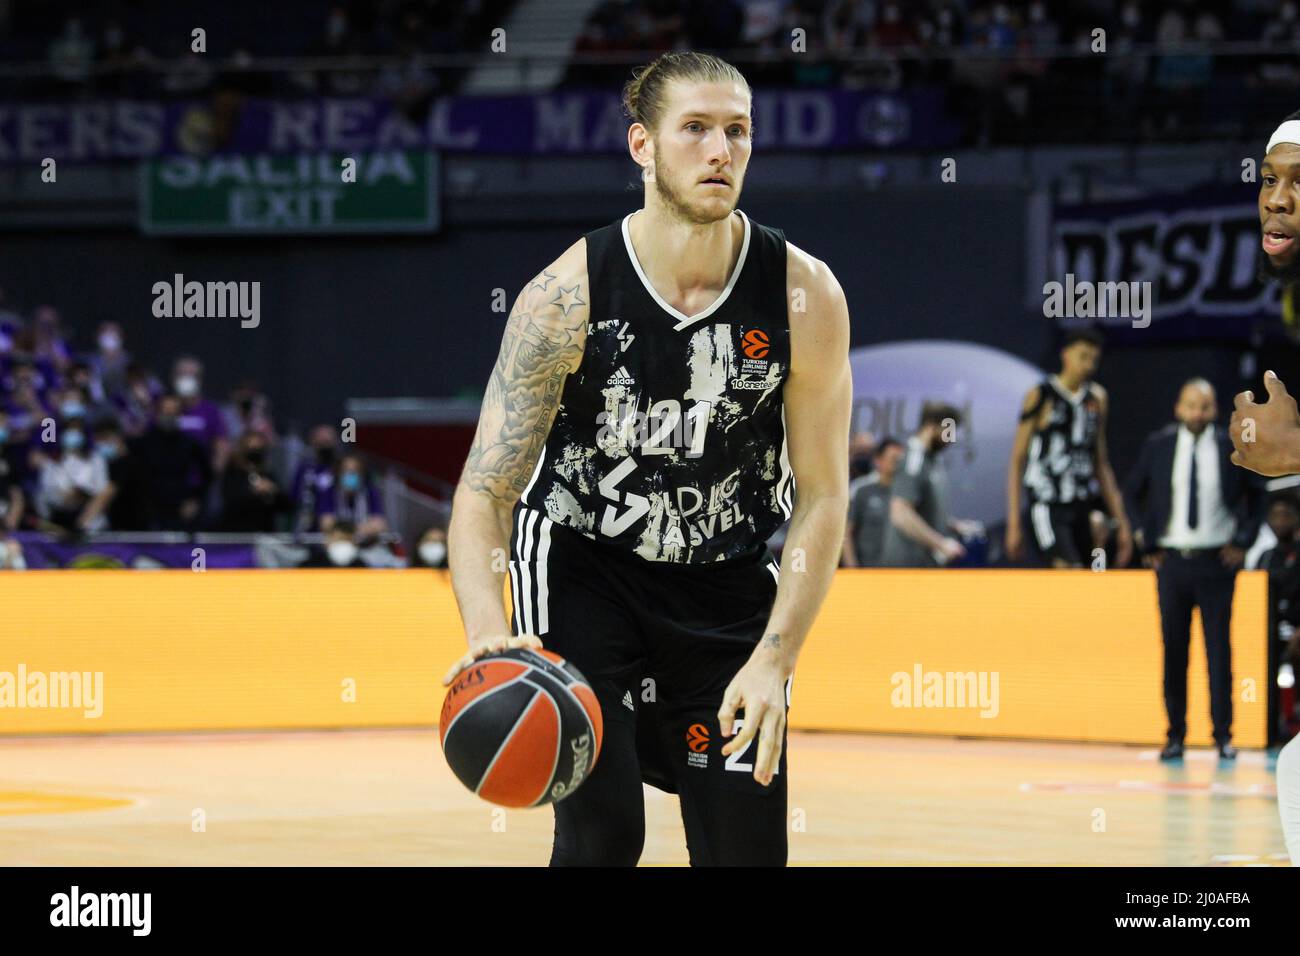 Madrid, Spain. 17th Mar, 2022. Dylan Osetkowski of Asvel Lyon-Villeurbanne during the Turkish Airlines Euroleague basketball match between Real Madrid and Asvel Lyon-Villeurbanne on march 17, 2022 at Wizink Center in Madrid, Spain Credit: Independent Photo Agency/Alamy Live Newss Stock Photo